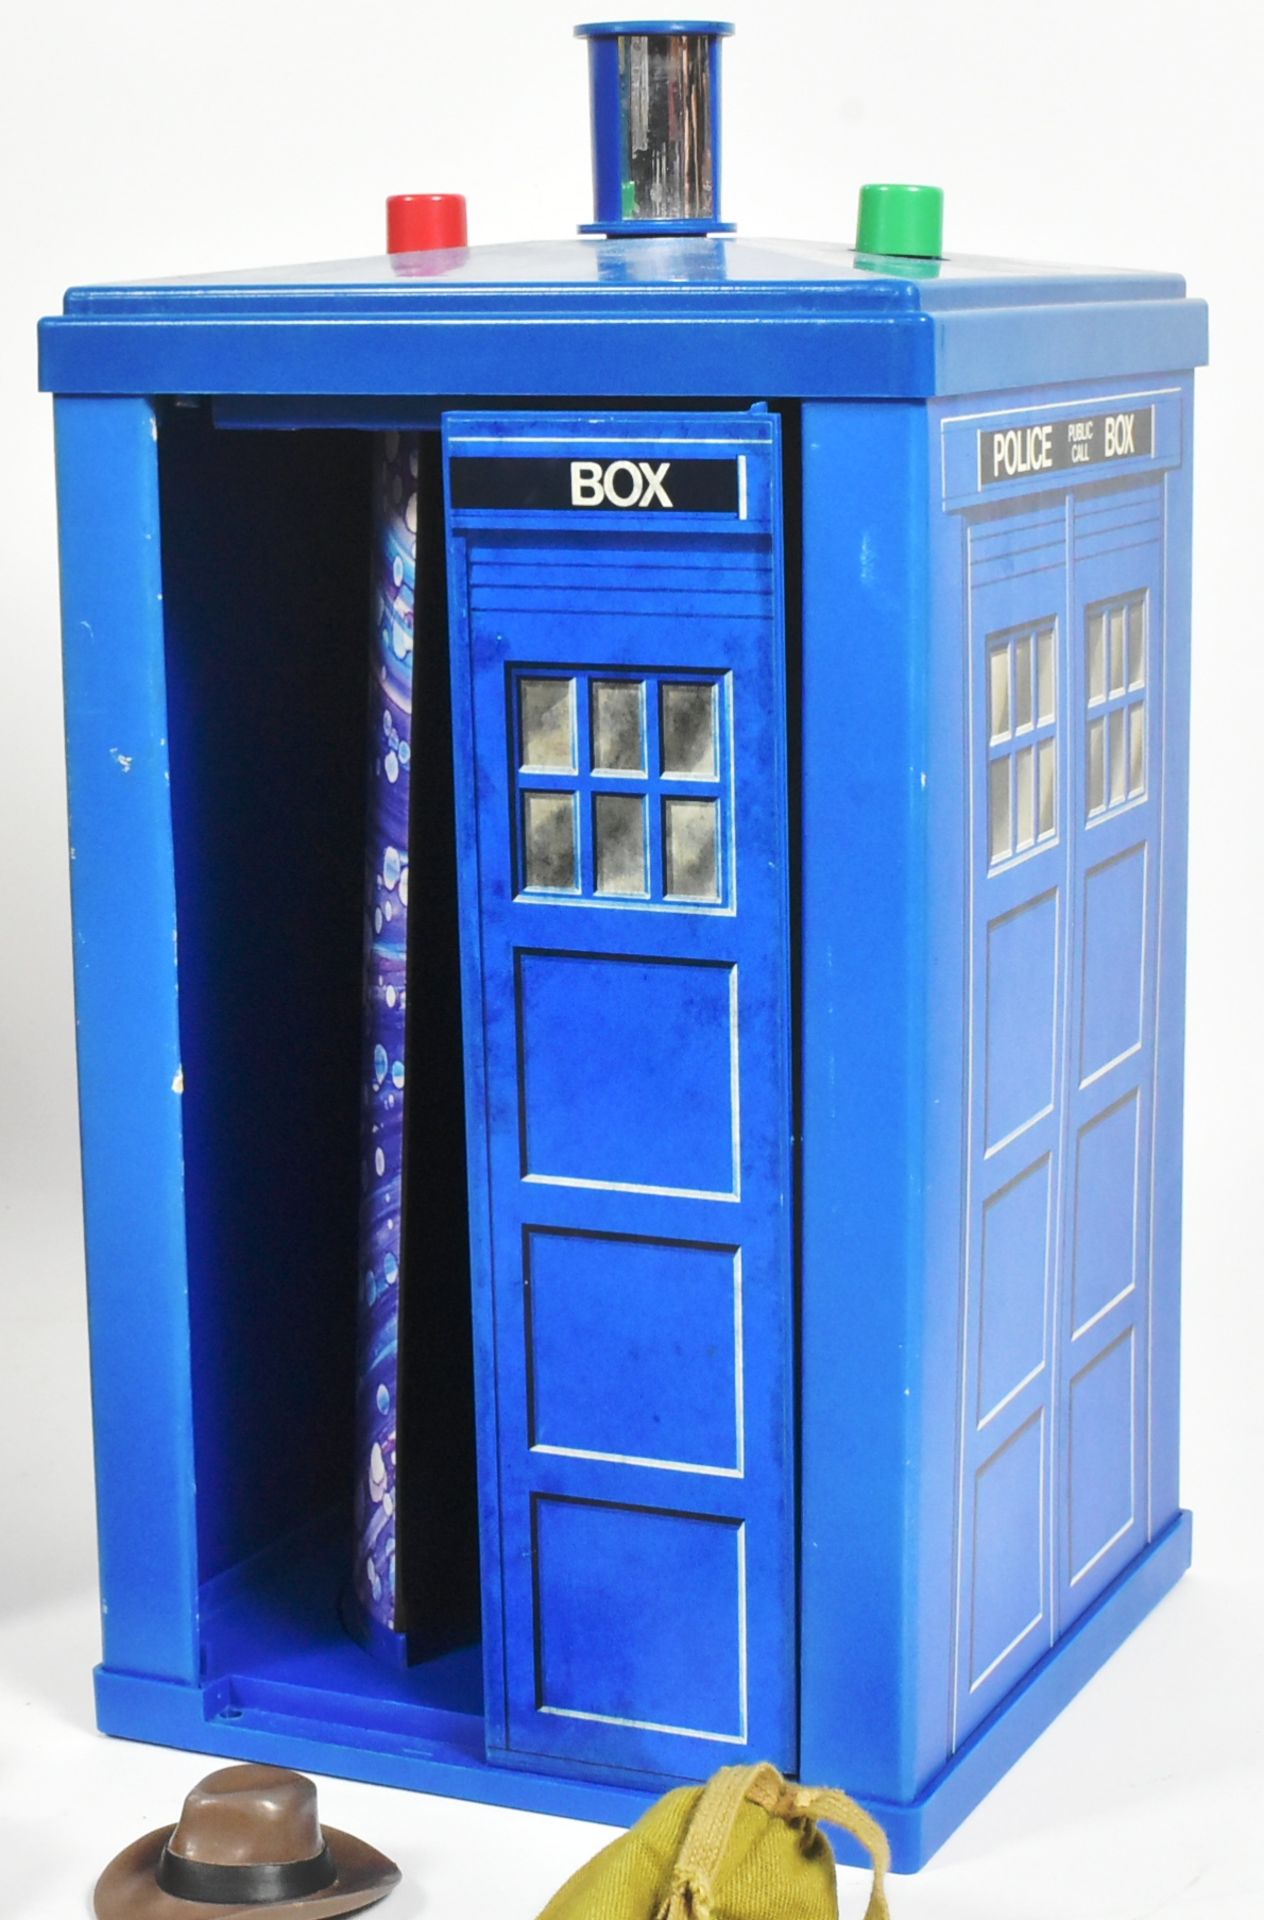 DOCTOR WHO - DENYS FISHER - VINTAGE TARDIS PLAYSET - Image 2 of 6